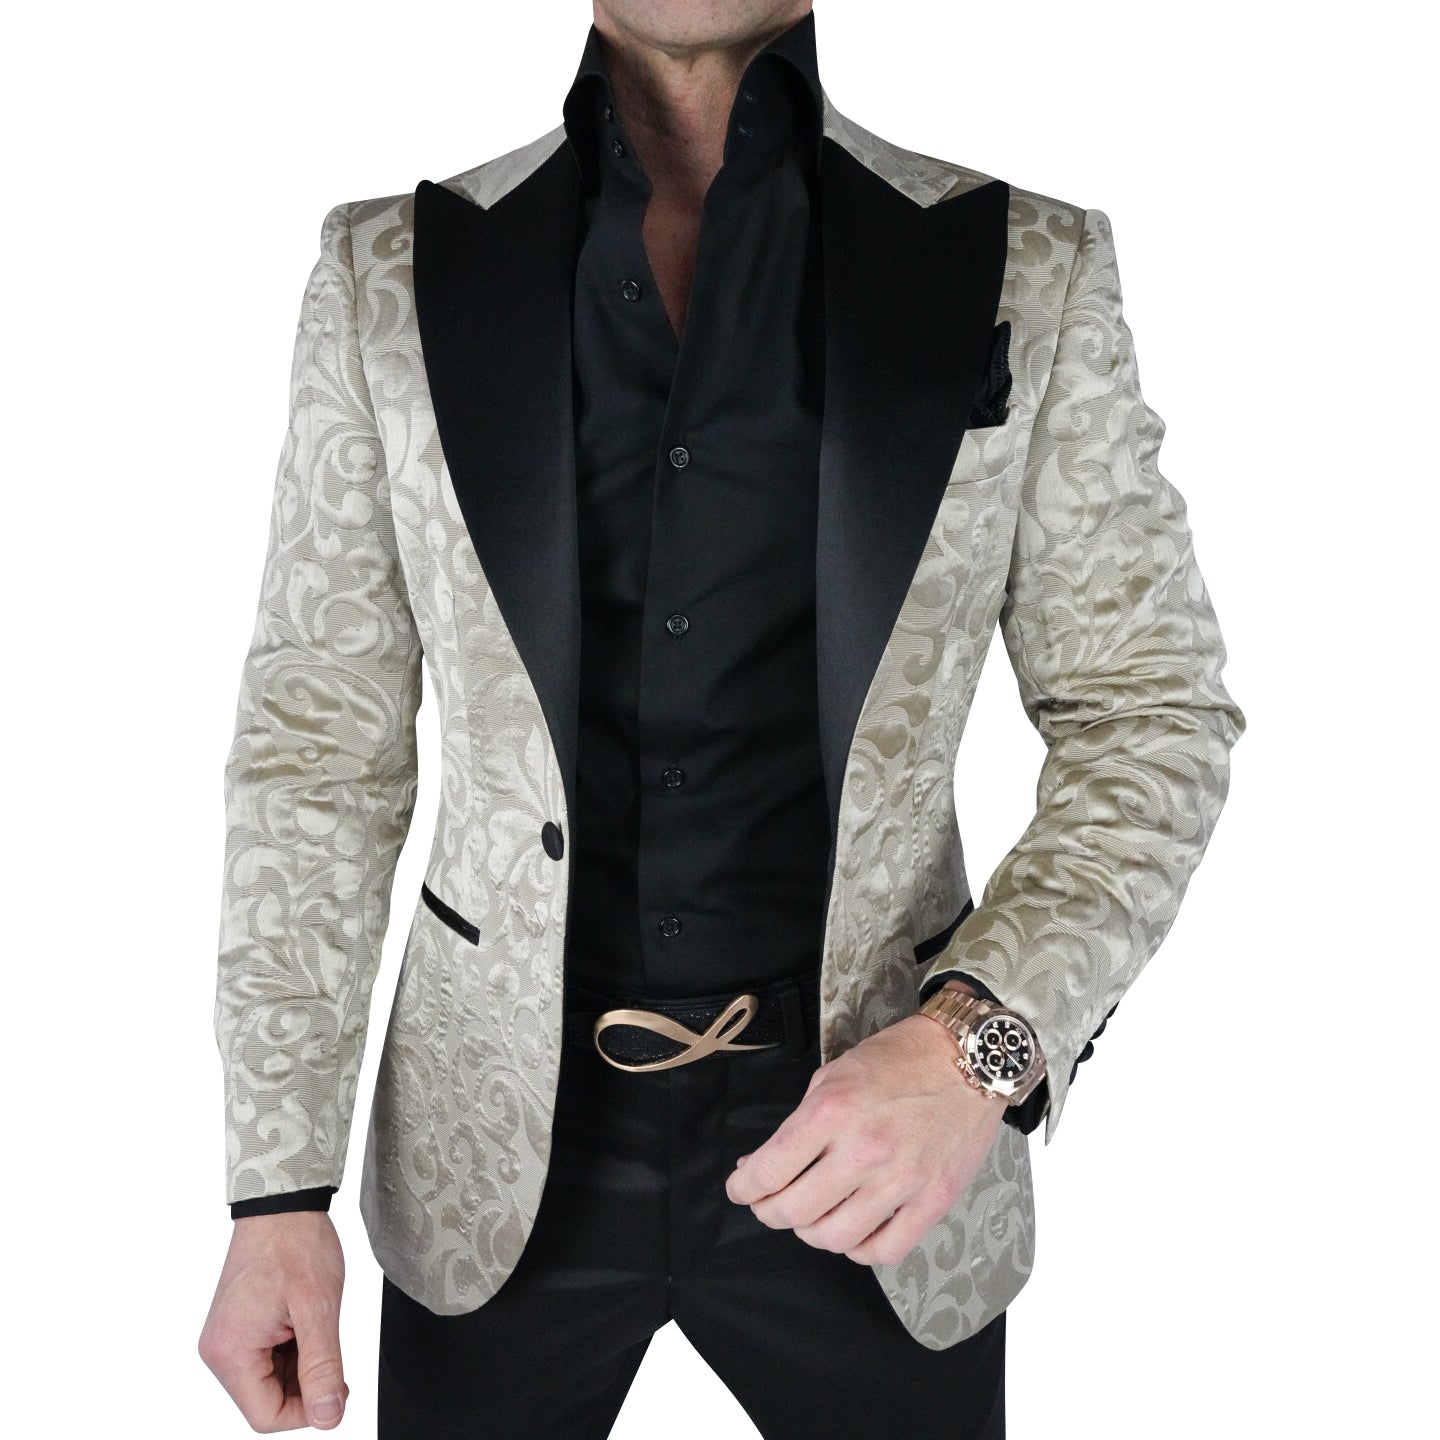 Champagne Oro and Black Paisley Jacket